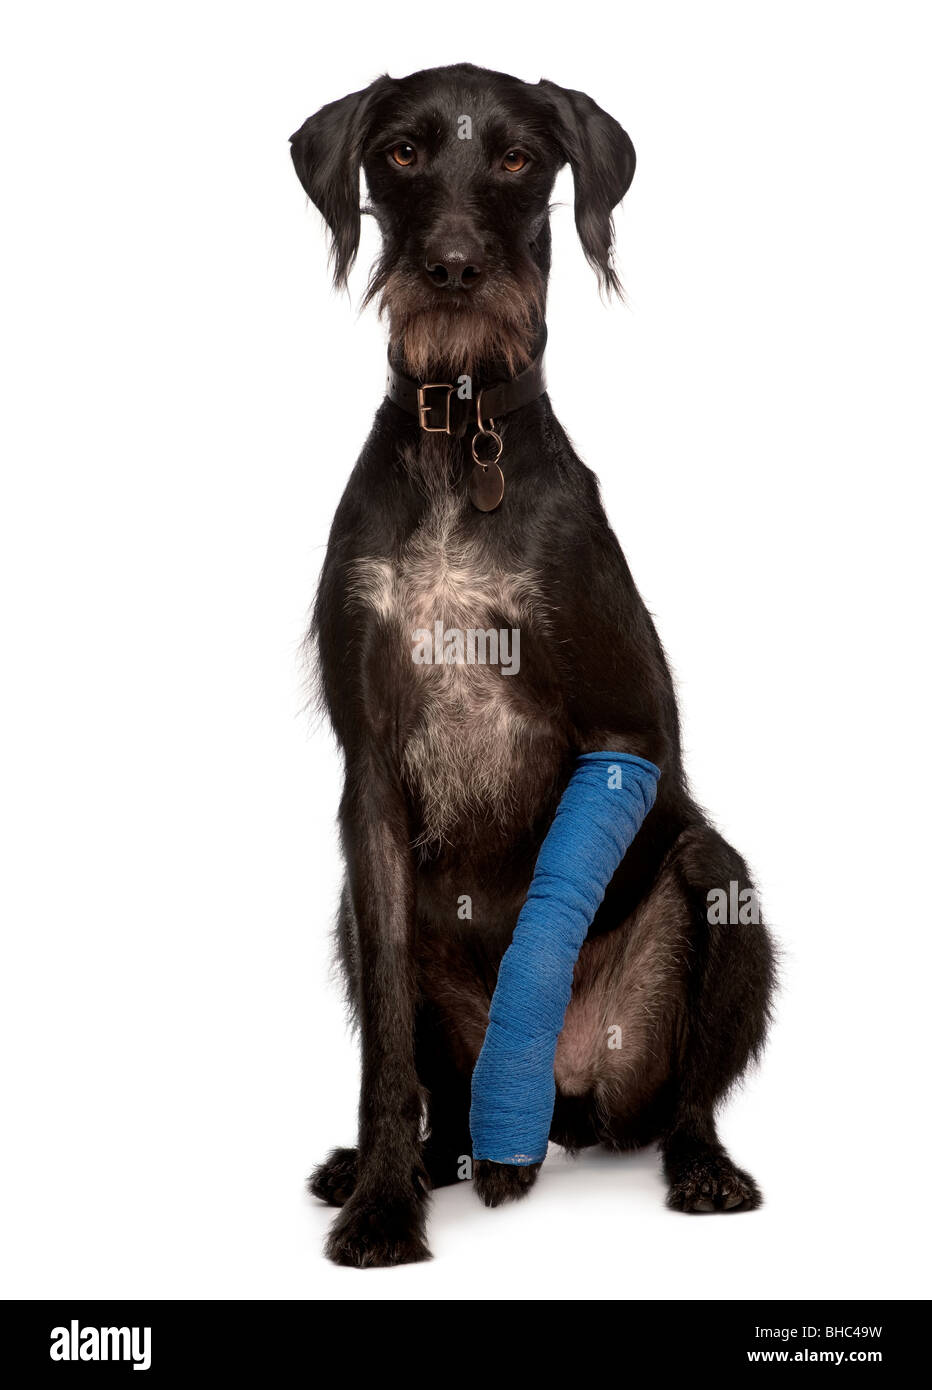 Lurcher dog with cast on leg, 3 years old, sitting in front of white background Stock Photo